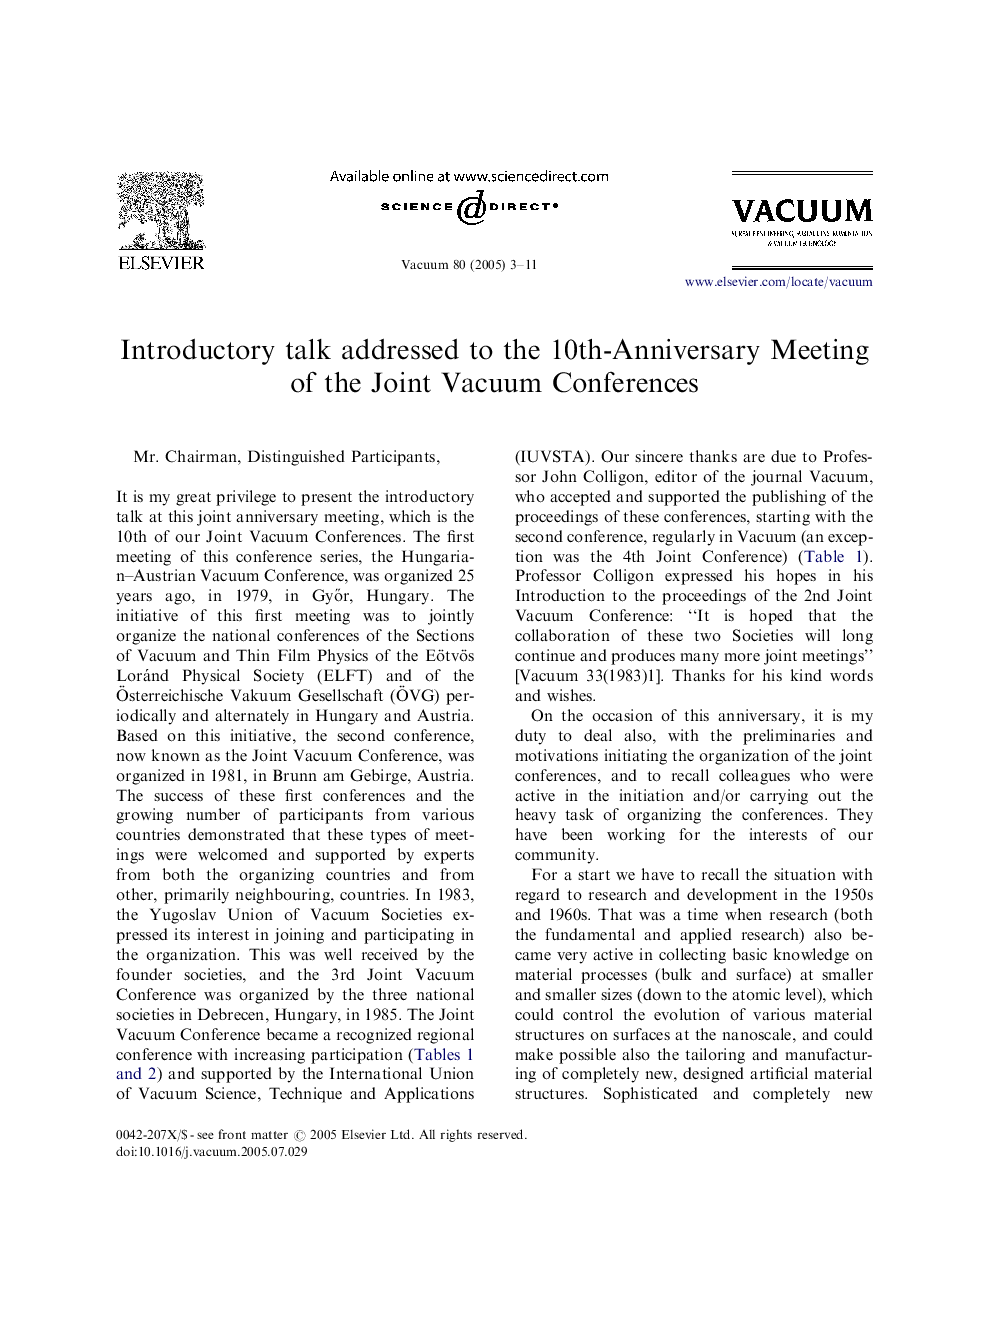 Introductory talk addressed to the 10th-Anniversary Meeting of the Joint Vacuum Conferences